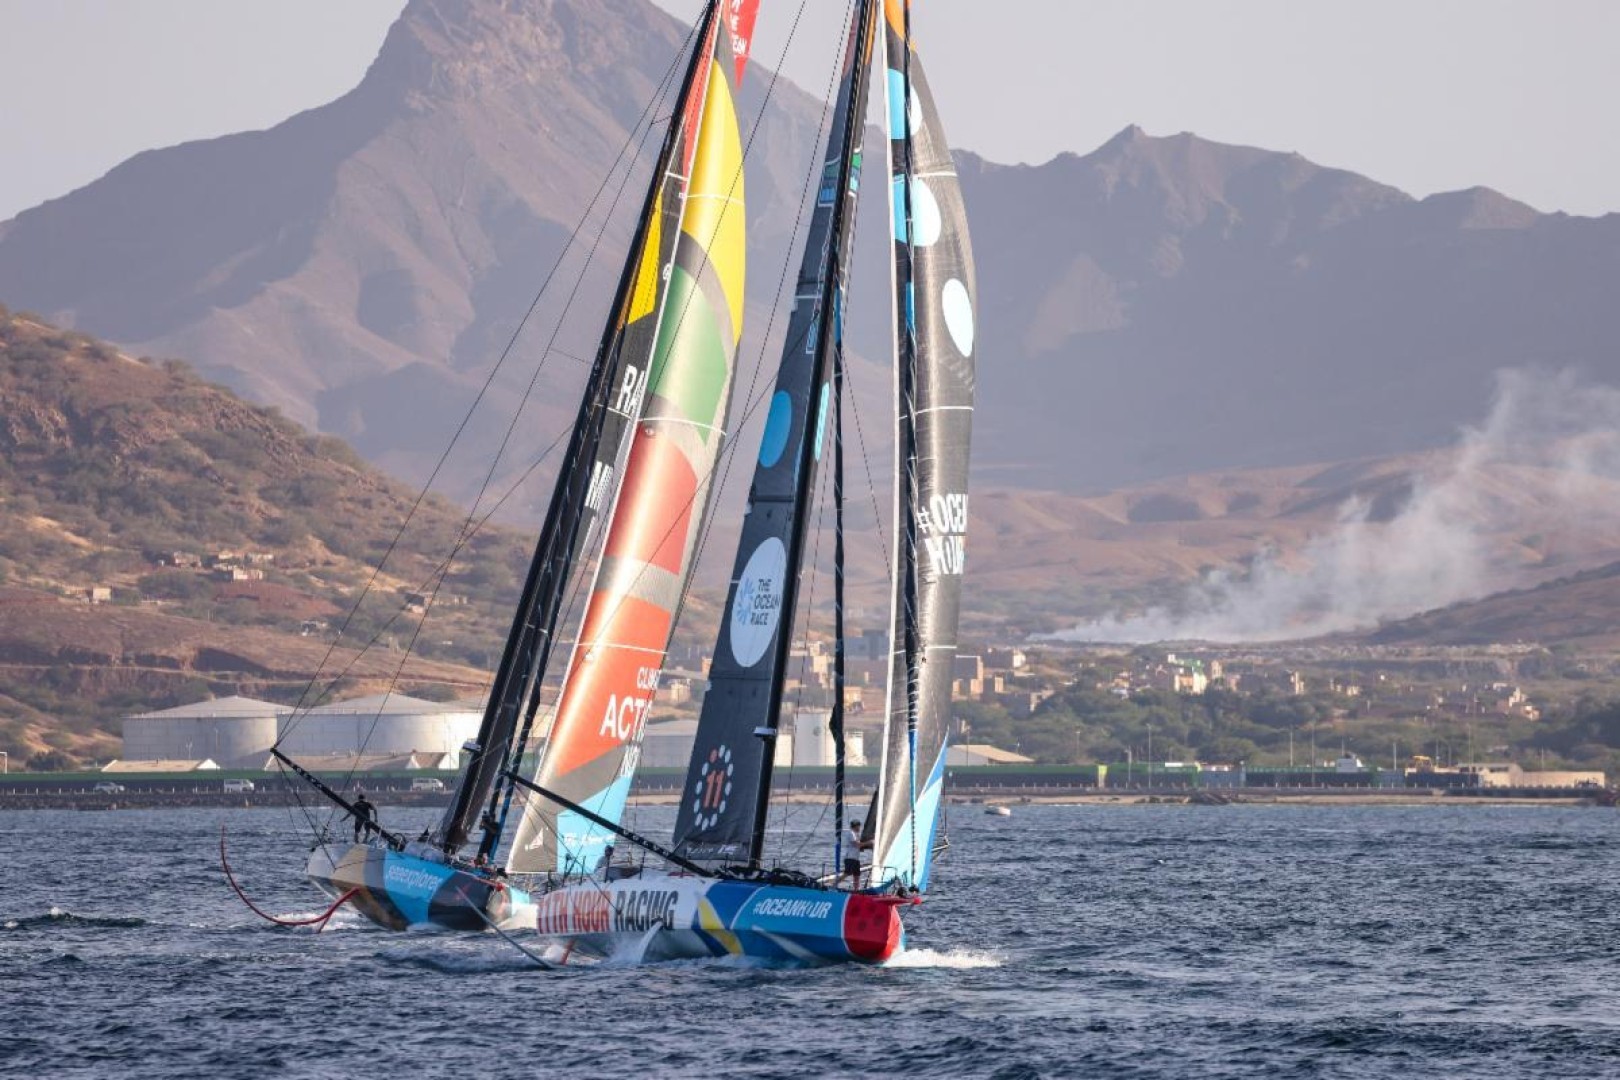 11th Hour Racing Team sets off for leg 2 of The Ocean Race